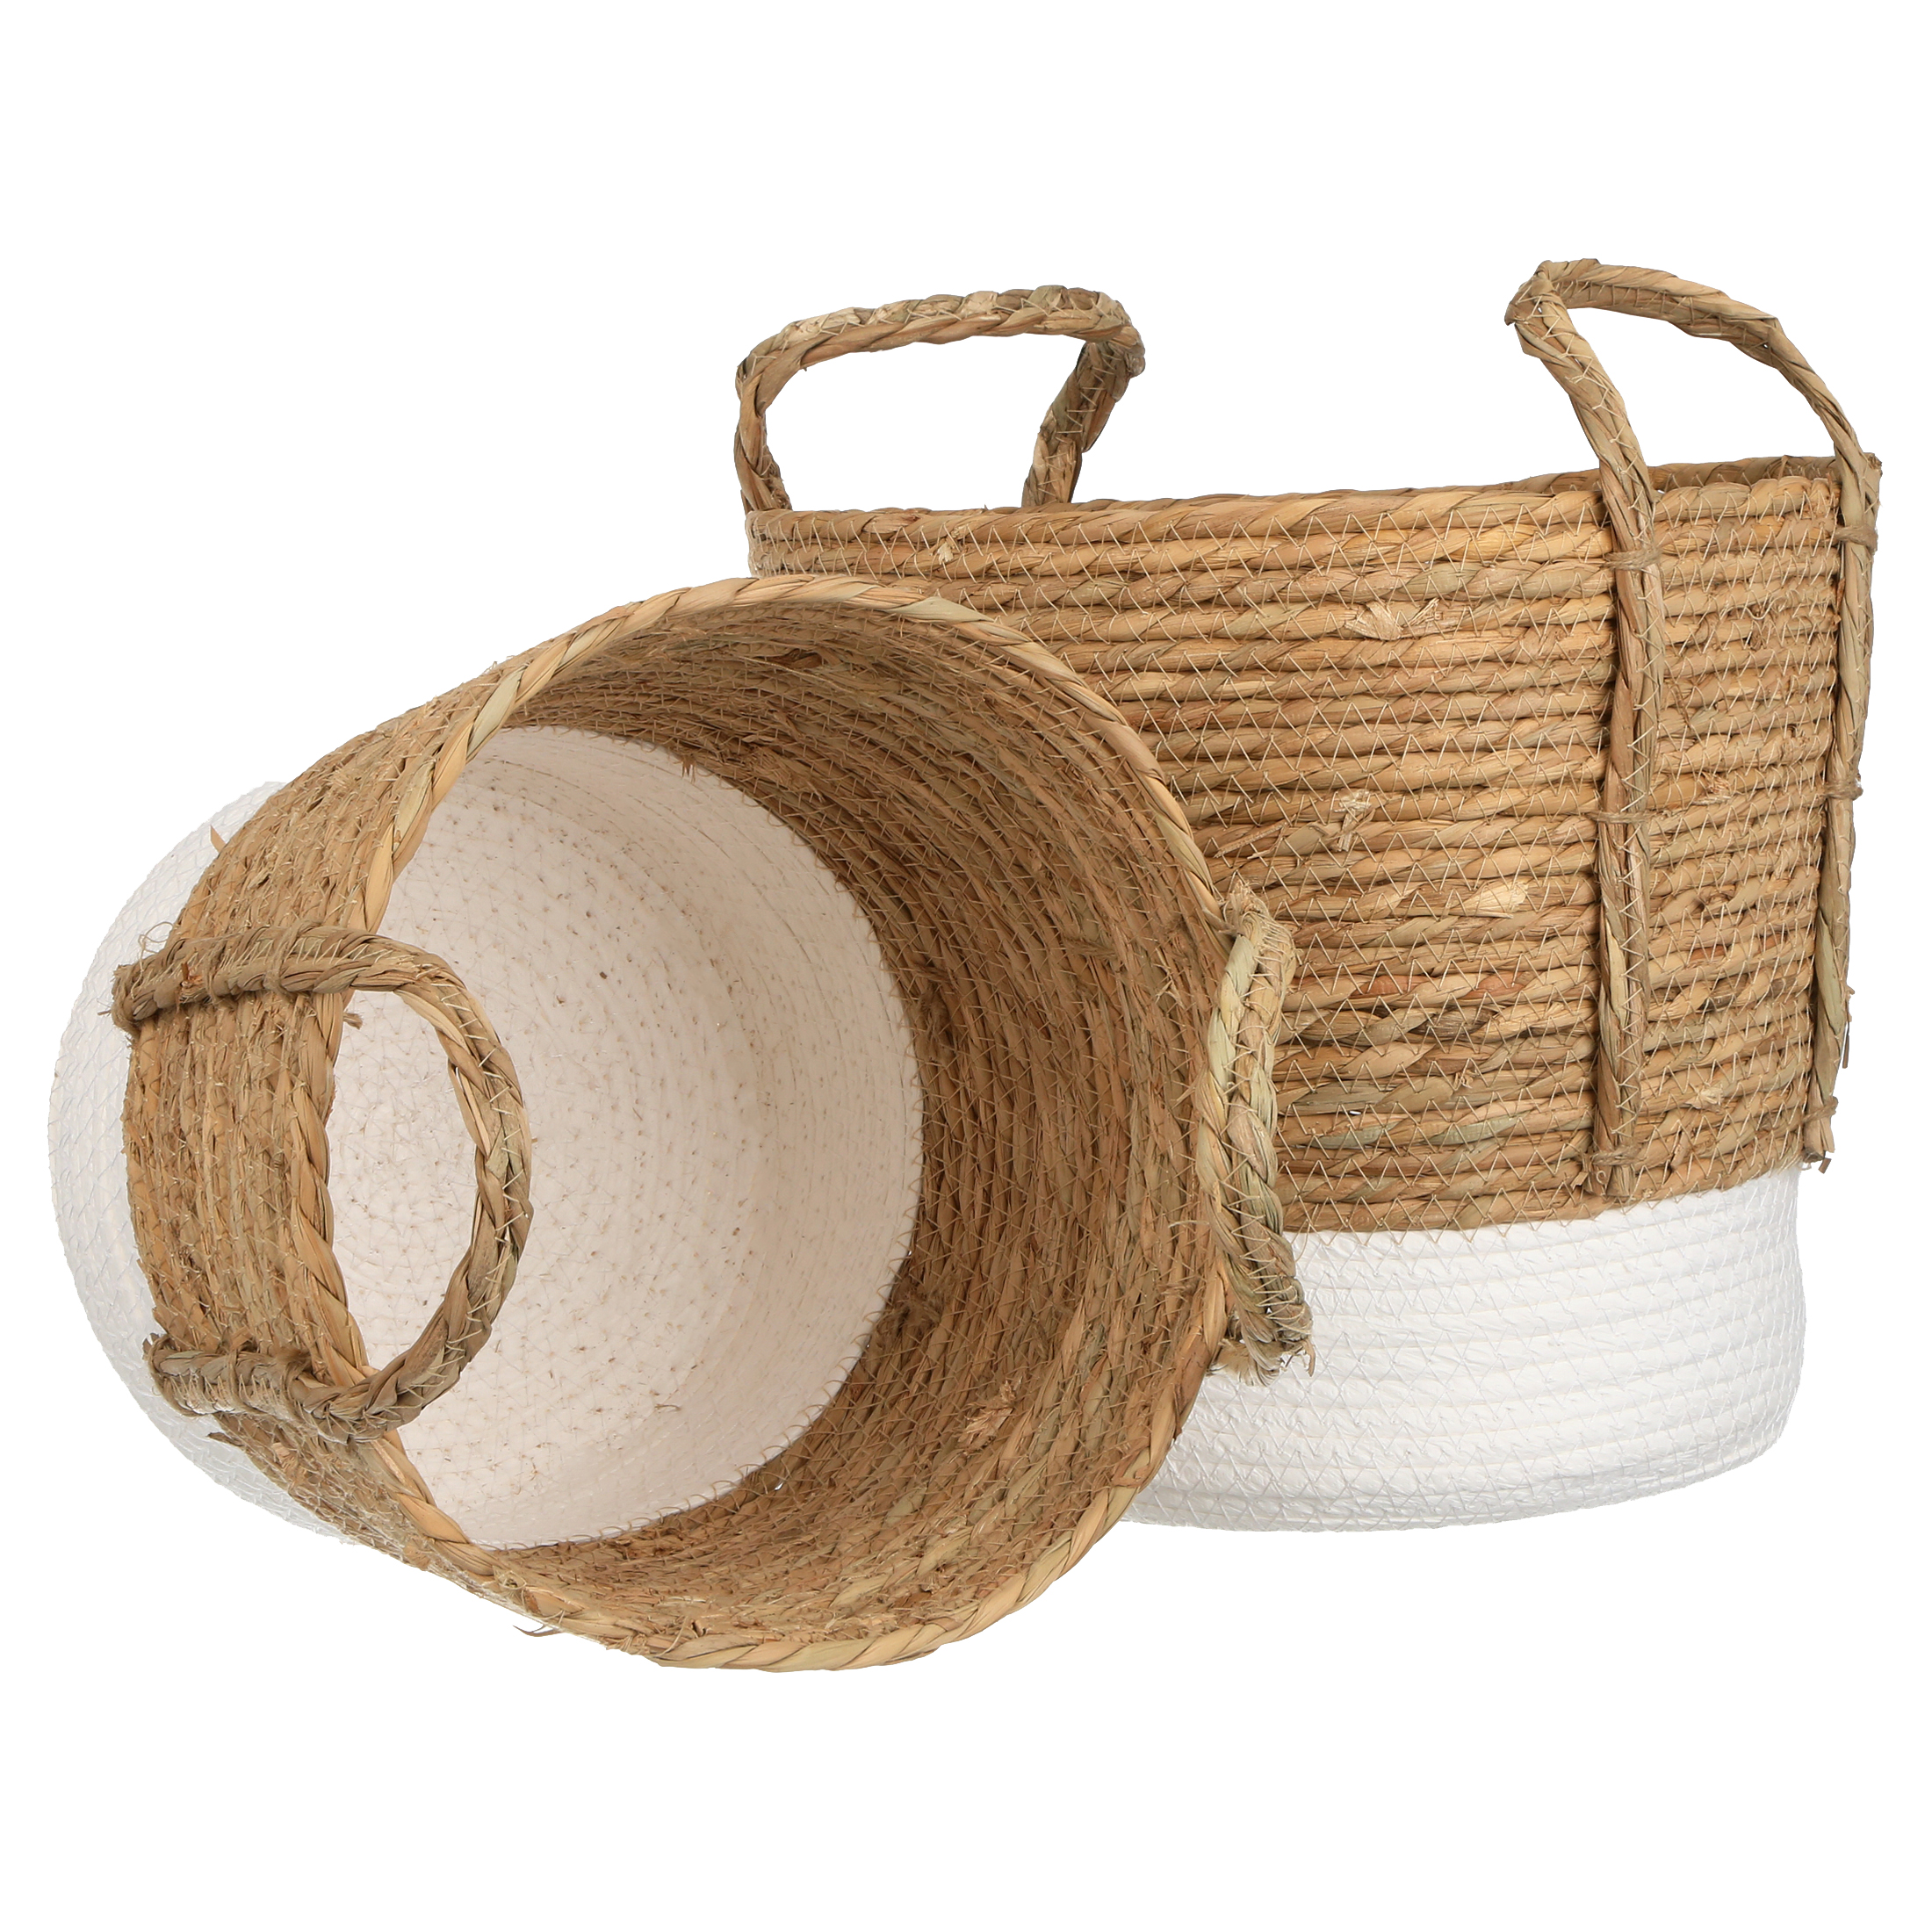 Mainstays Seagrass & Paper Rope Baskets, Set of 2, Small and Medium, Storage - image 4 of 6